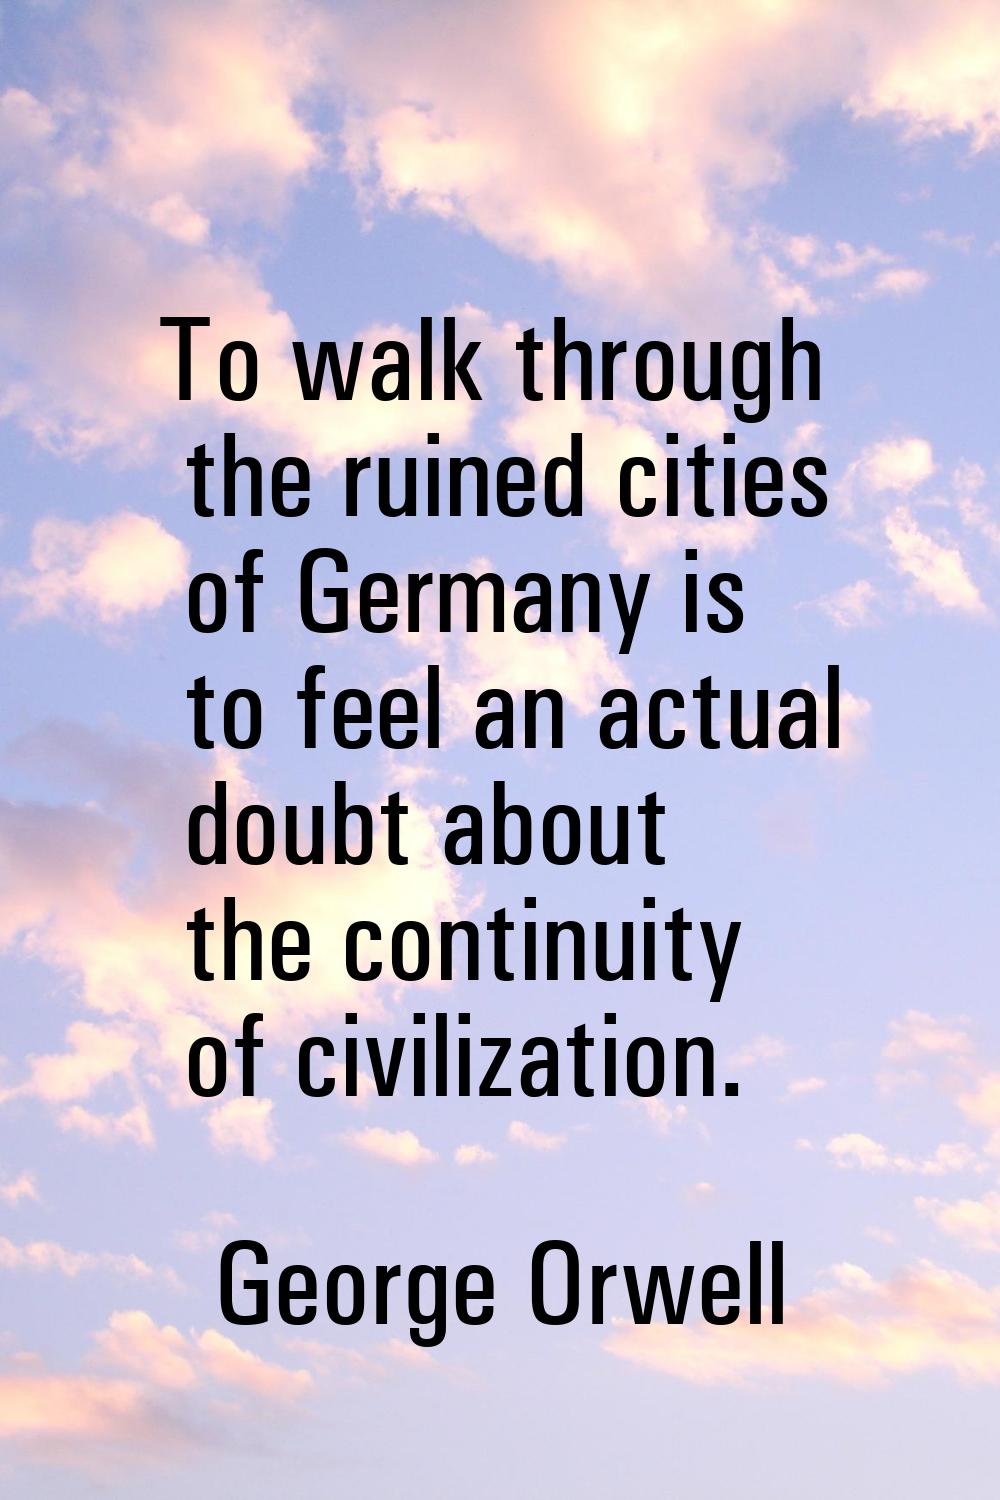 To walk through the ruined cities of Germany is to feel an actual doubt about the continuity of civ